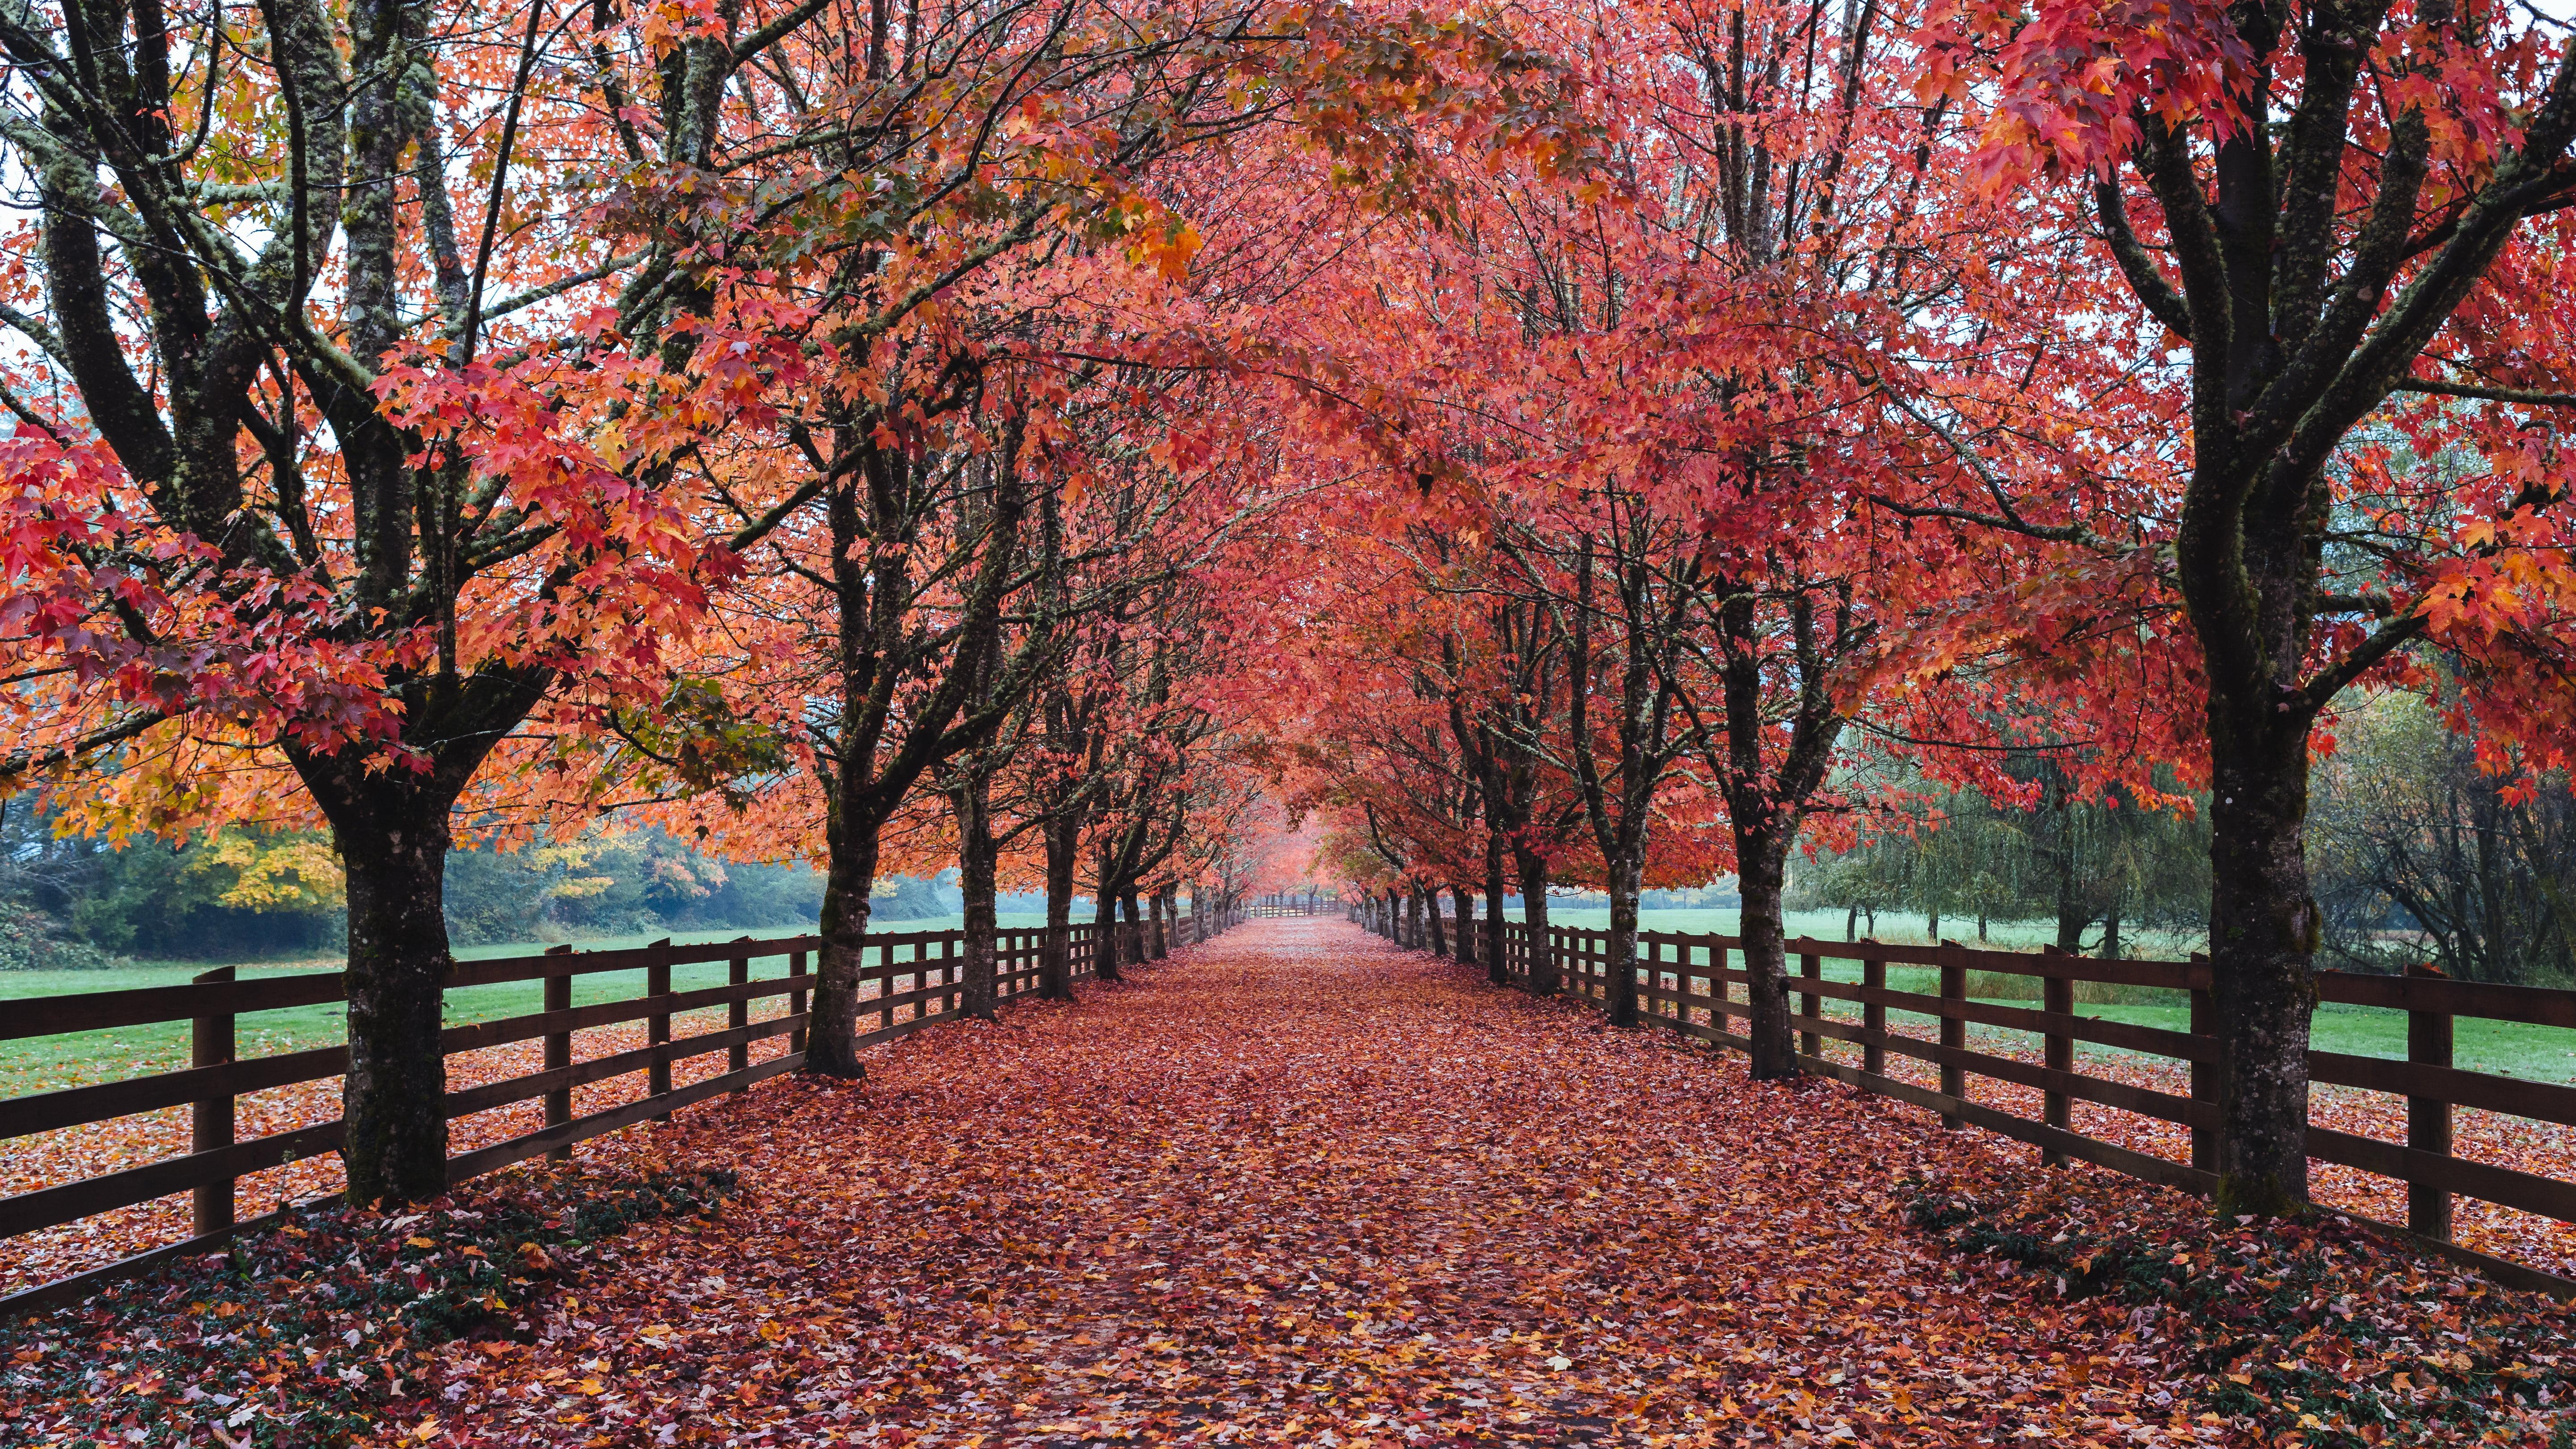 Pathway with red leaves fallen from trees enclosed